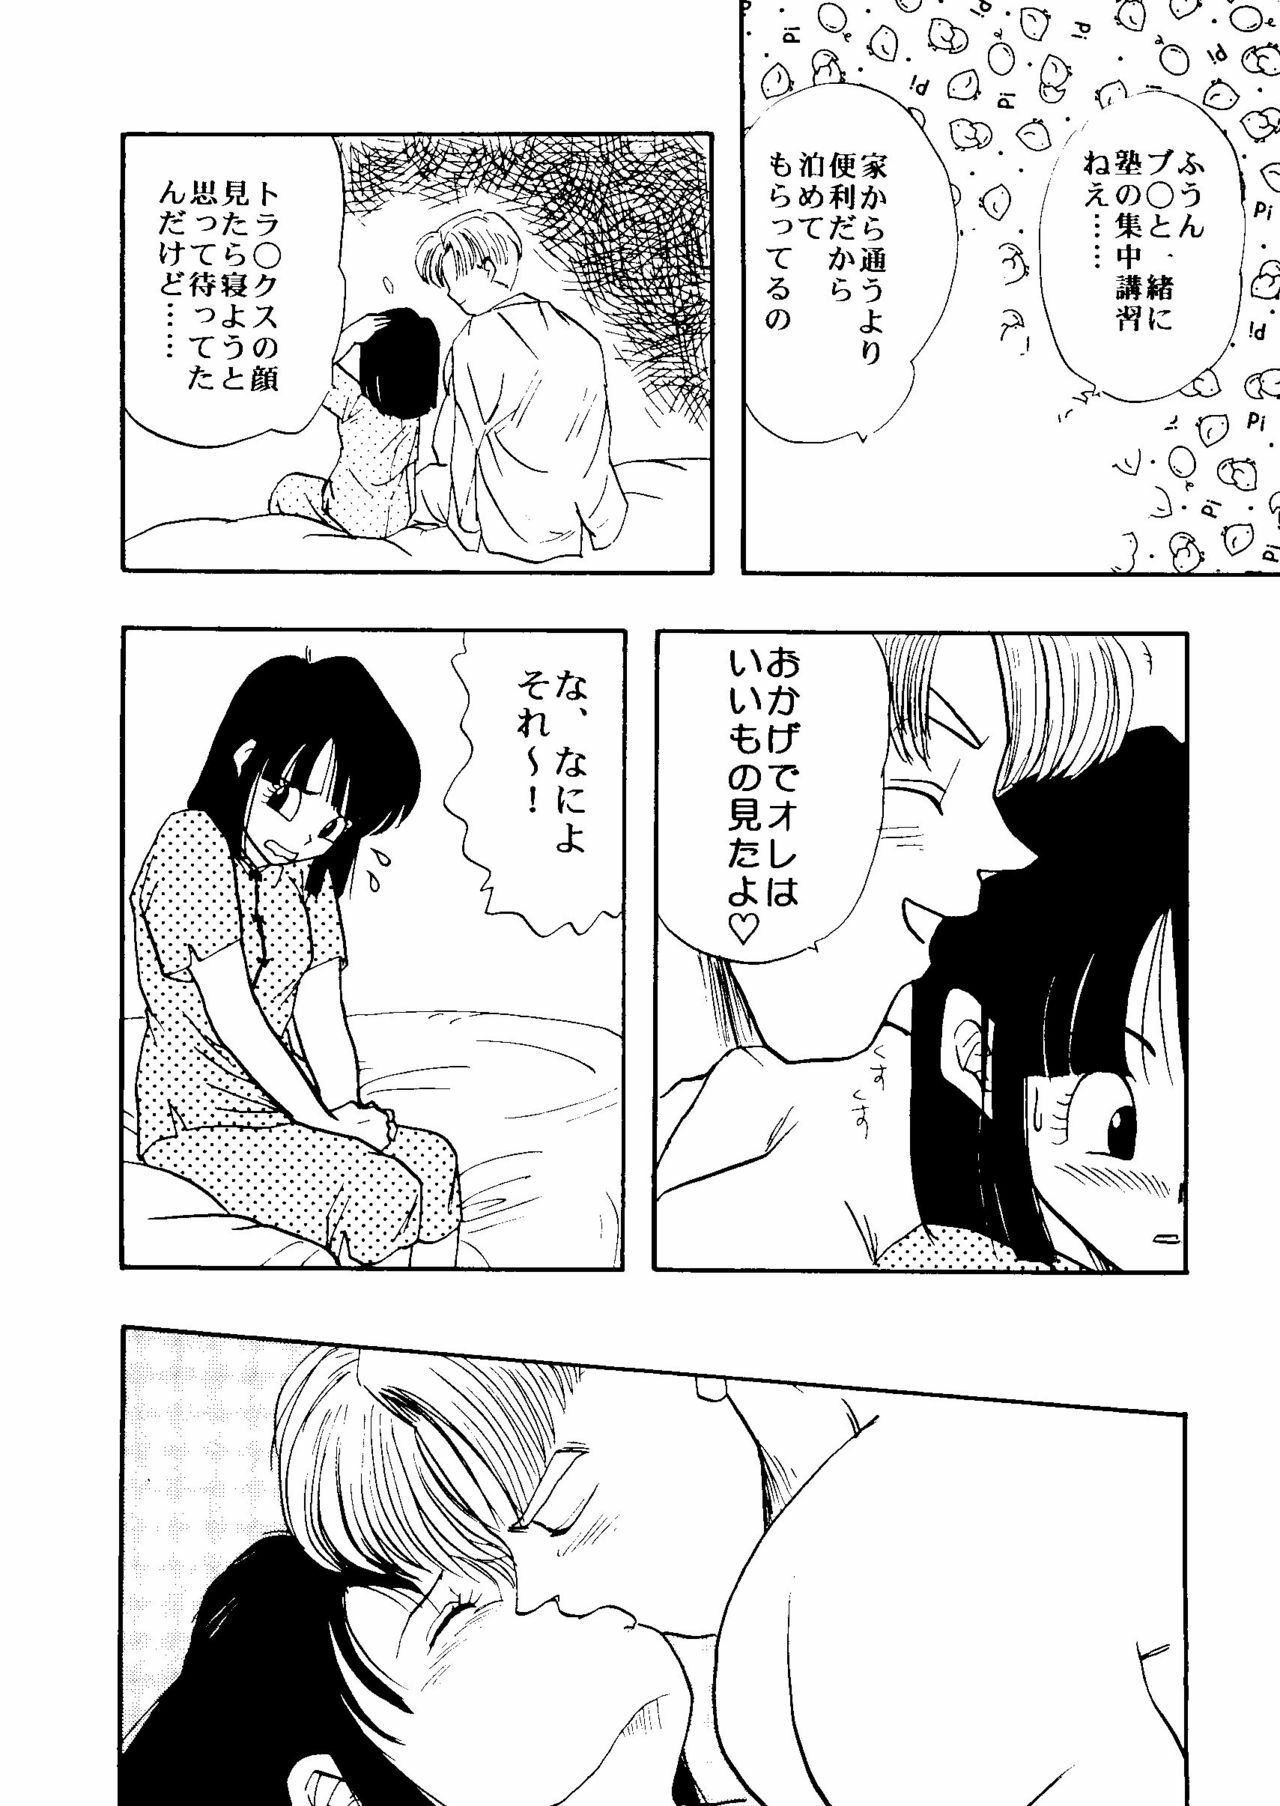 [Anthology] CUTE 1 Koi no Russian Roulette (Various) page 44 full